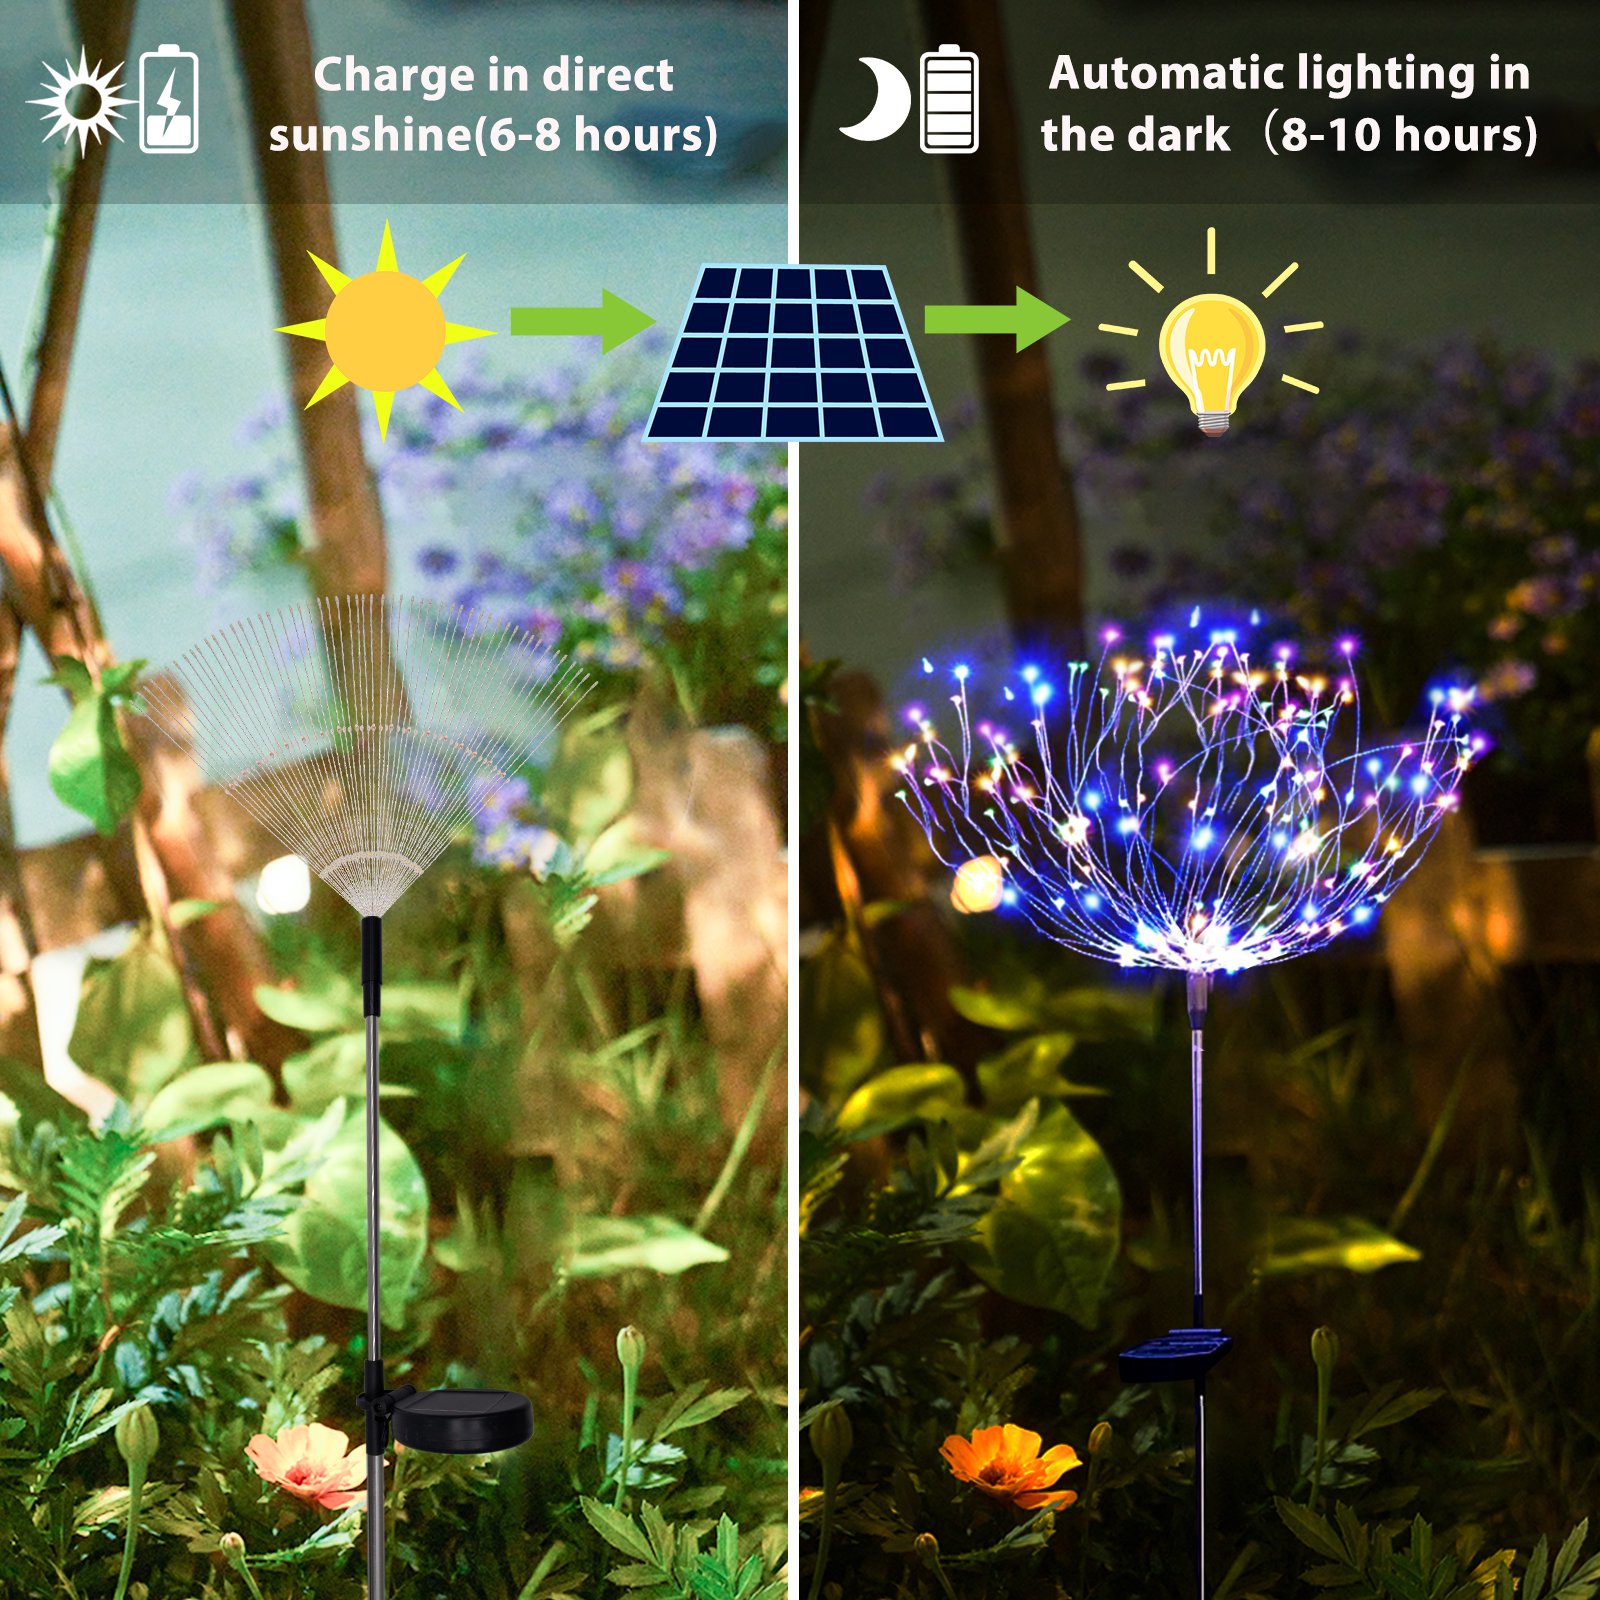 LED-Flood-Street-Lights-Solar-Garden-Lights-Fireworks-Lights-Outdoor-Waterproof-120-LED-2-Lighting-Modes-Auto-On-Off-Solar-Outdoor-Lights-for-Pathway-Yard-Christmas-Party-etc-34